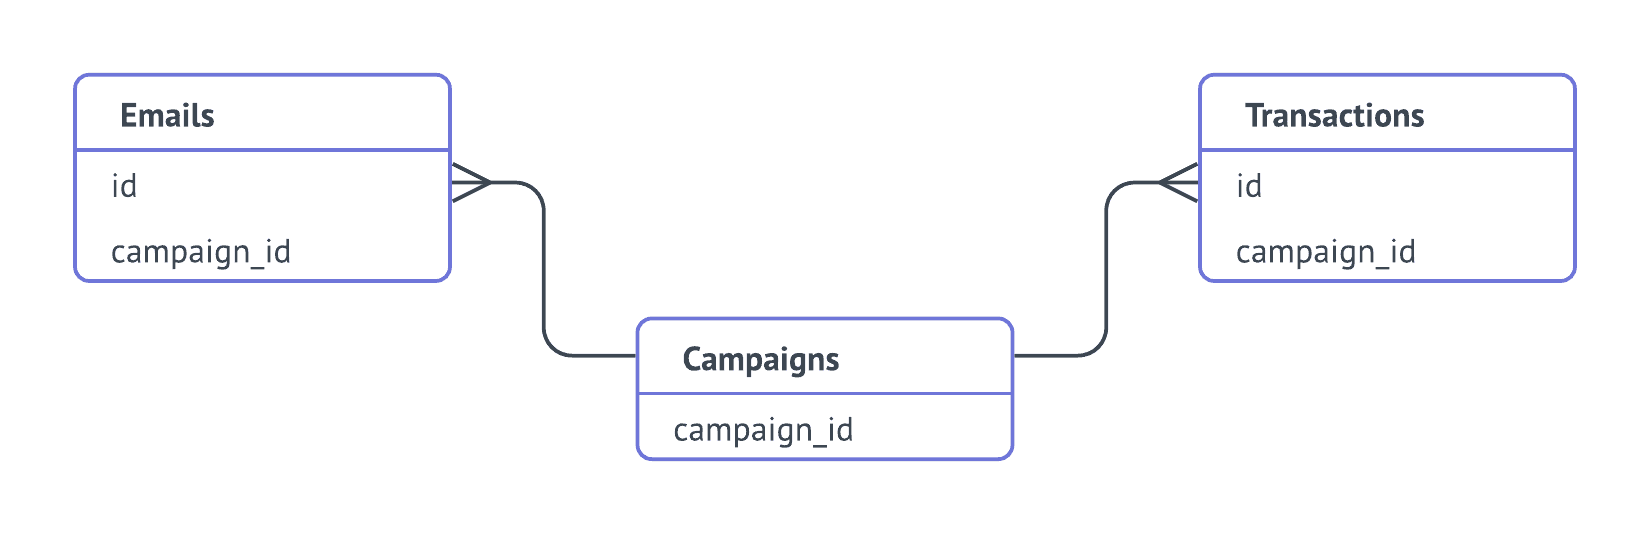 Many-to-Many Entity Diagram for emails, campaigns and transactions